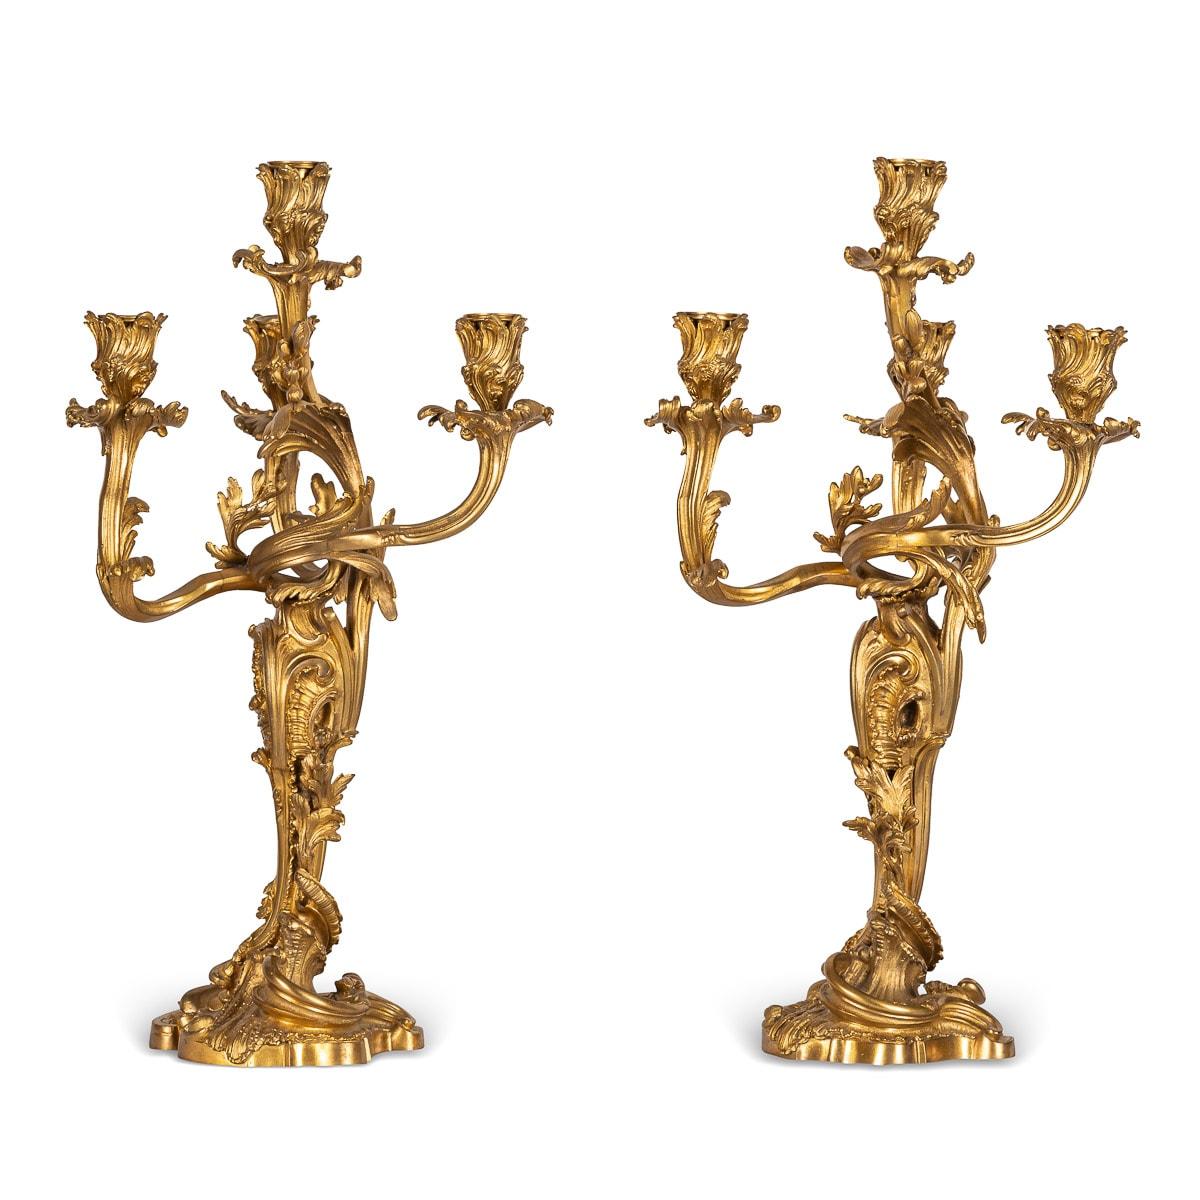 Antique late-19th century French pair of Louis XV style ormolu bronze four-light candelabra, beautifully modelled in the Rococo style, each foliate-sheathed spirally fluted baluster stem supporting candlearms, decorated with acanthus-leaf and flower